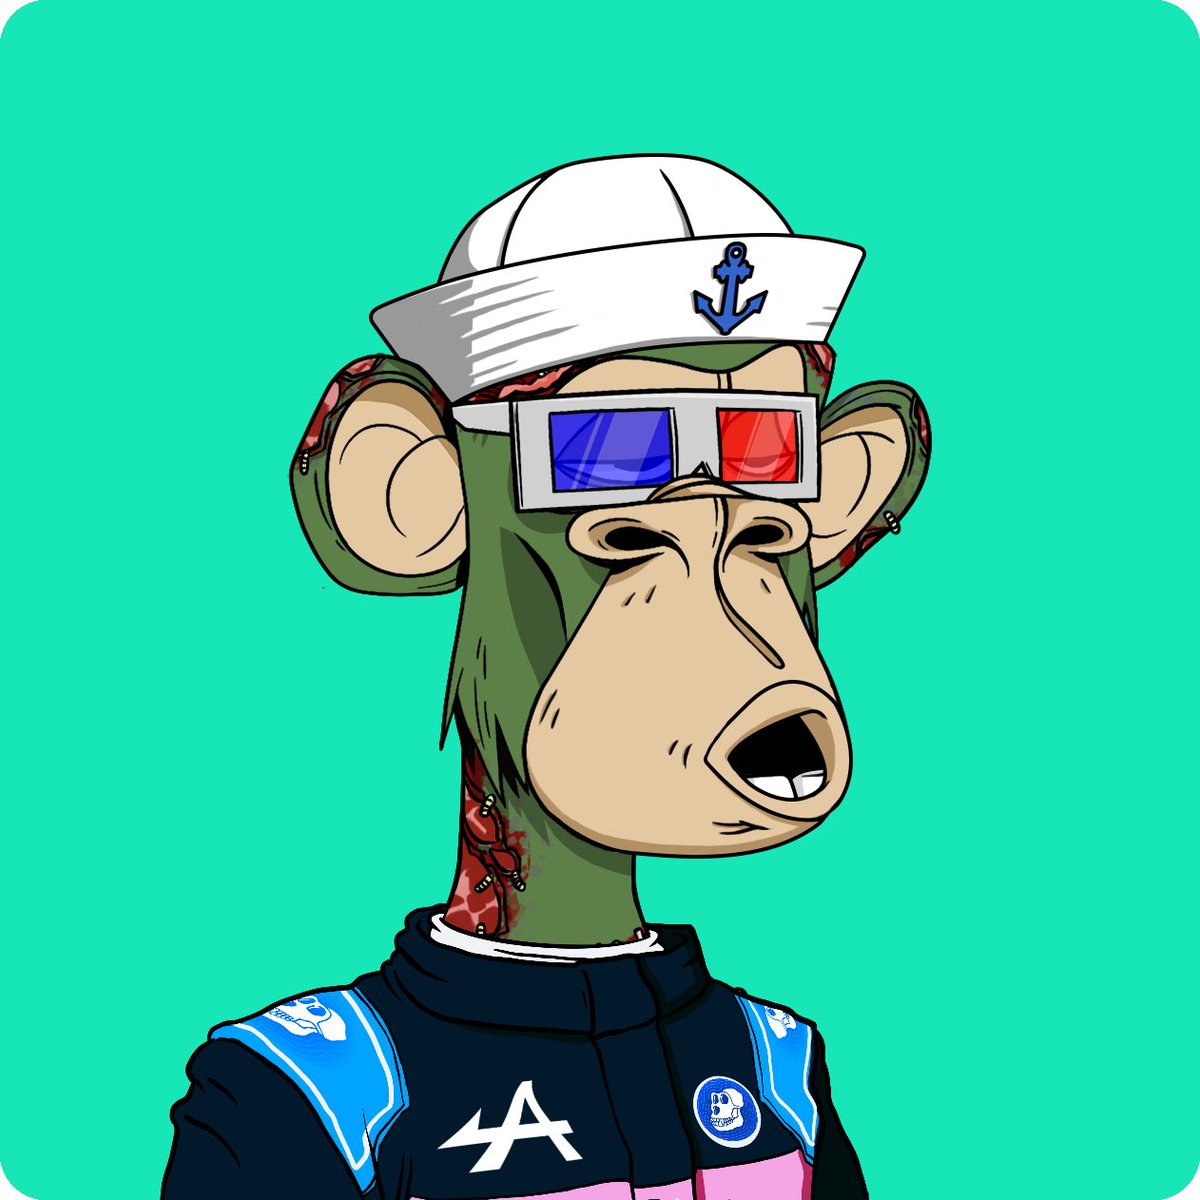 Just dressed my Ape to support @AlpineF1Team during the Miami Grand Prix! Powered by @ApeCoin 🏁 boredcloset.xyz/apecoin?tokenI…